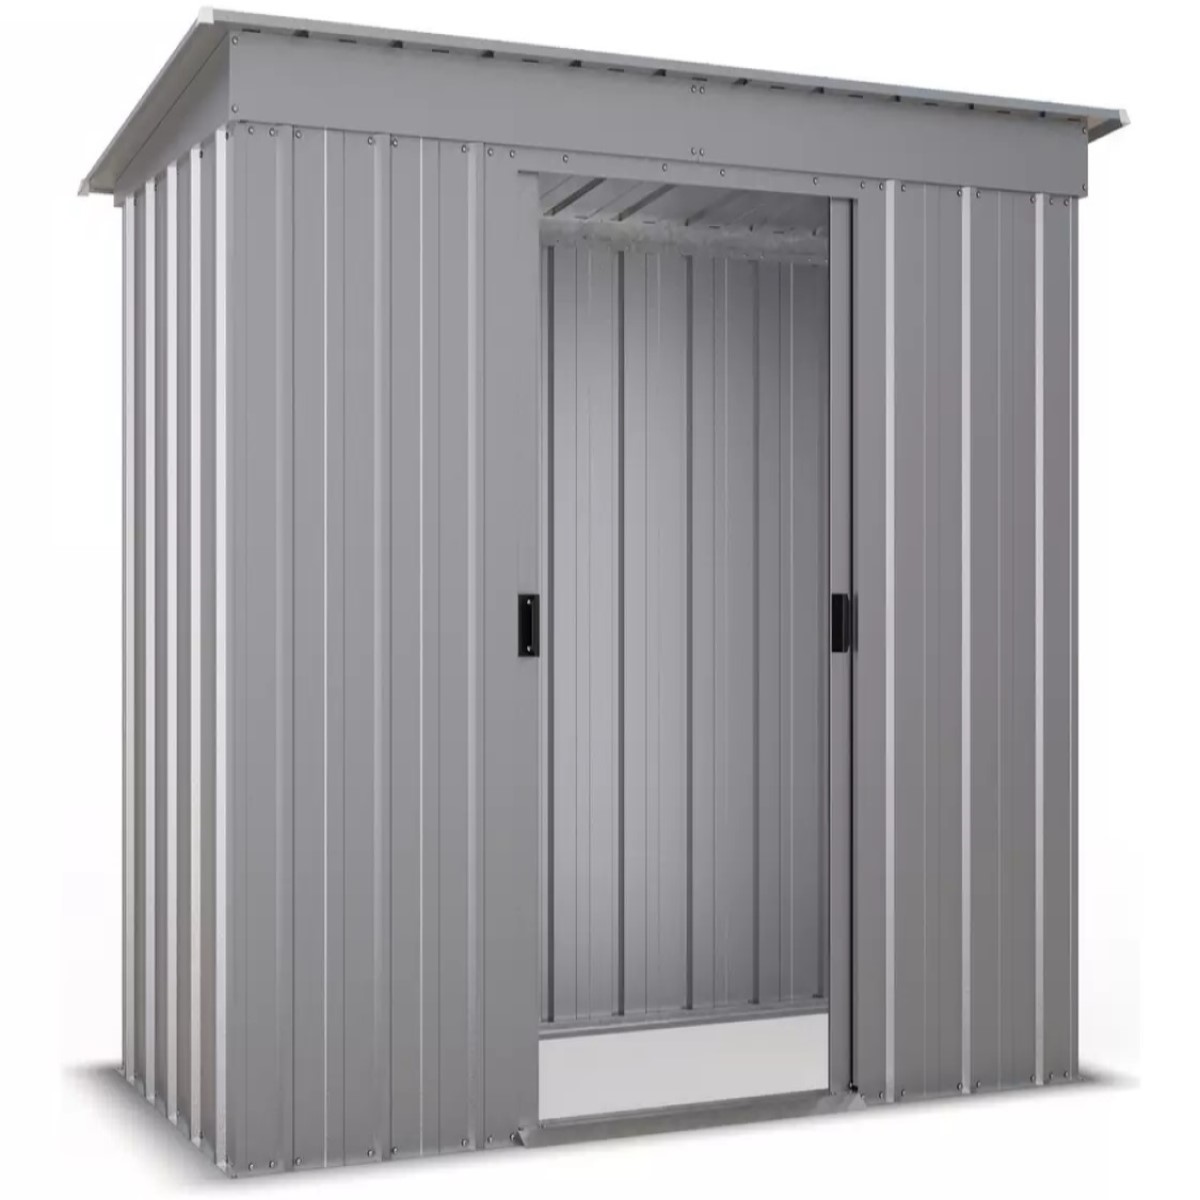 Featured image for “YardMaster 64TPZ Store-All Pent Metal Shed”